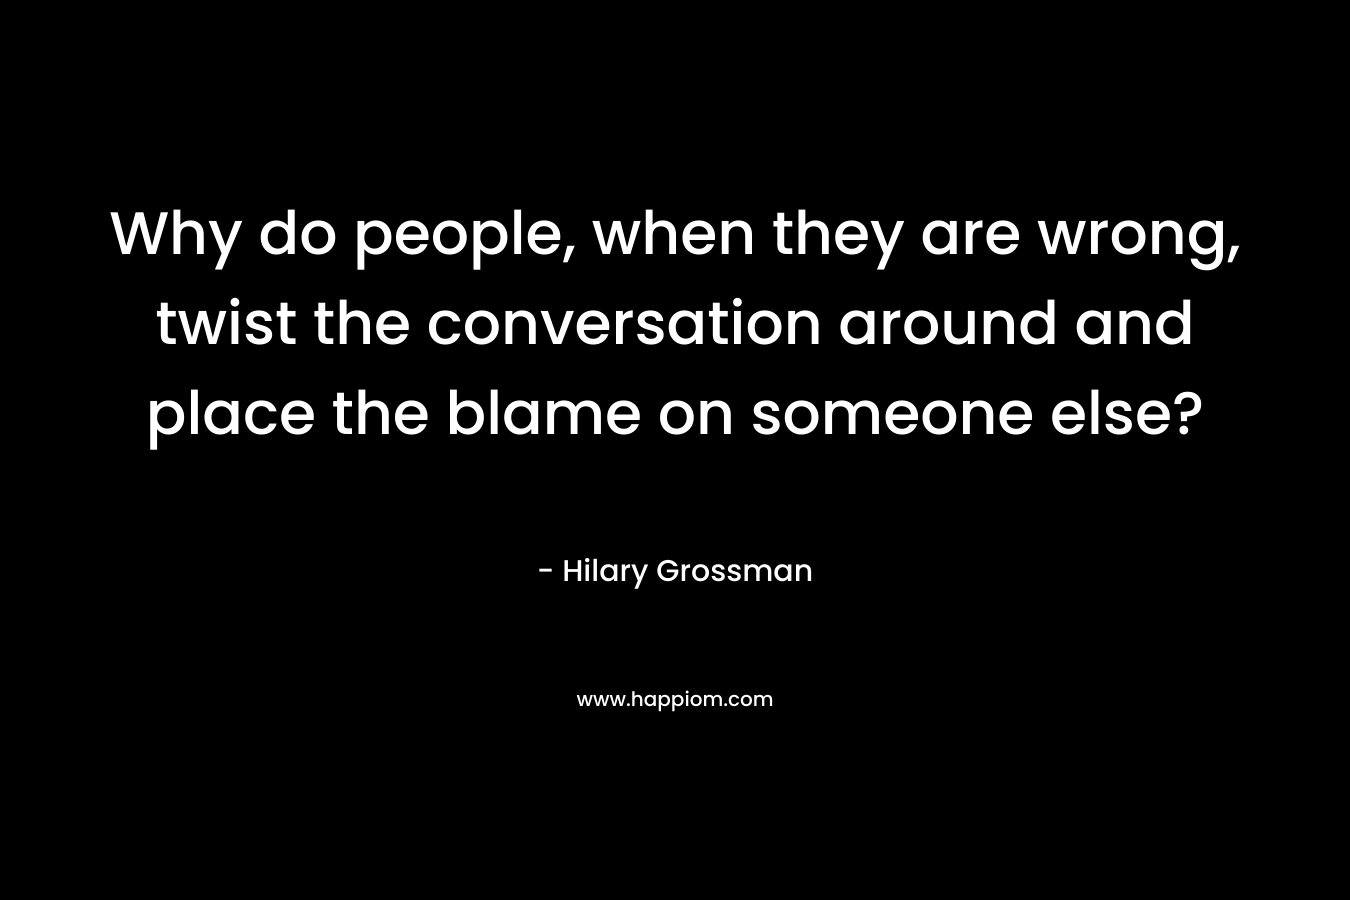 Why do people, when they are wrong, twist the conversation around and place the blame on someone else?